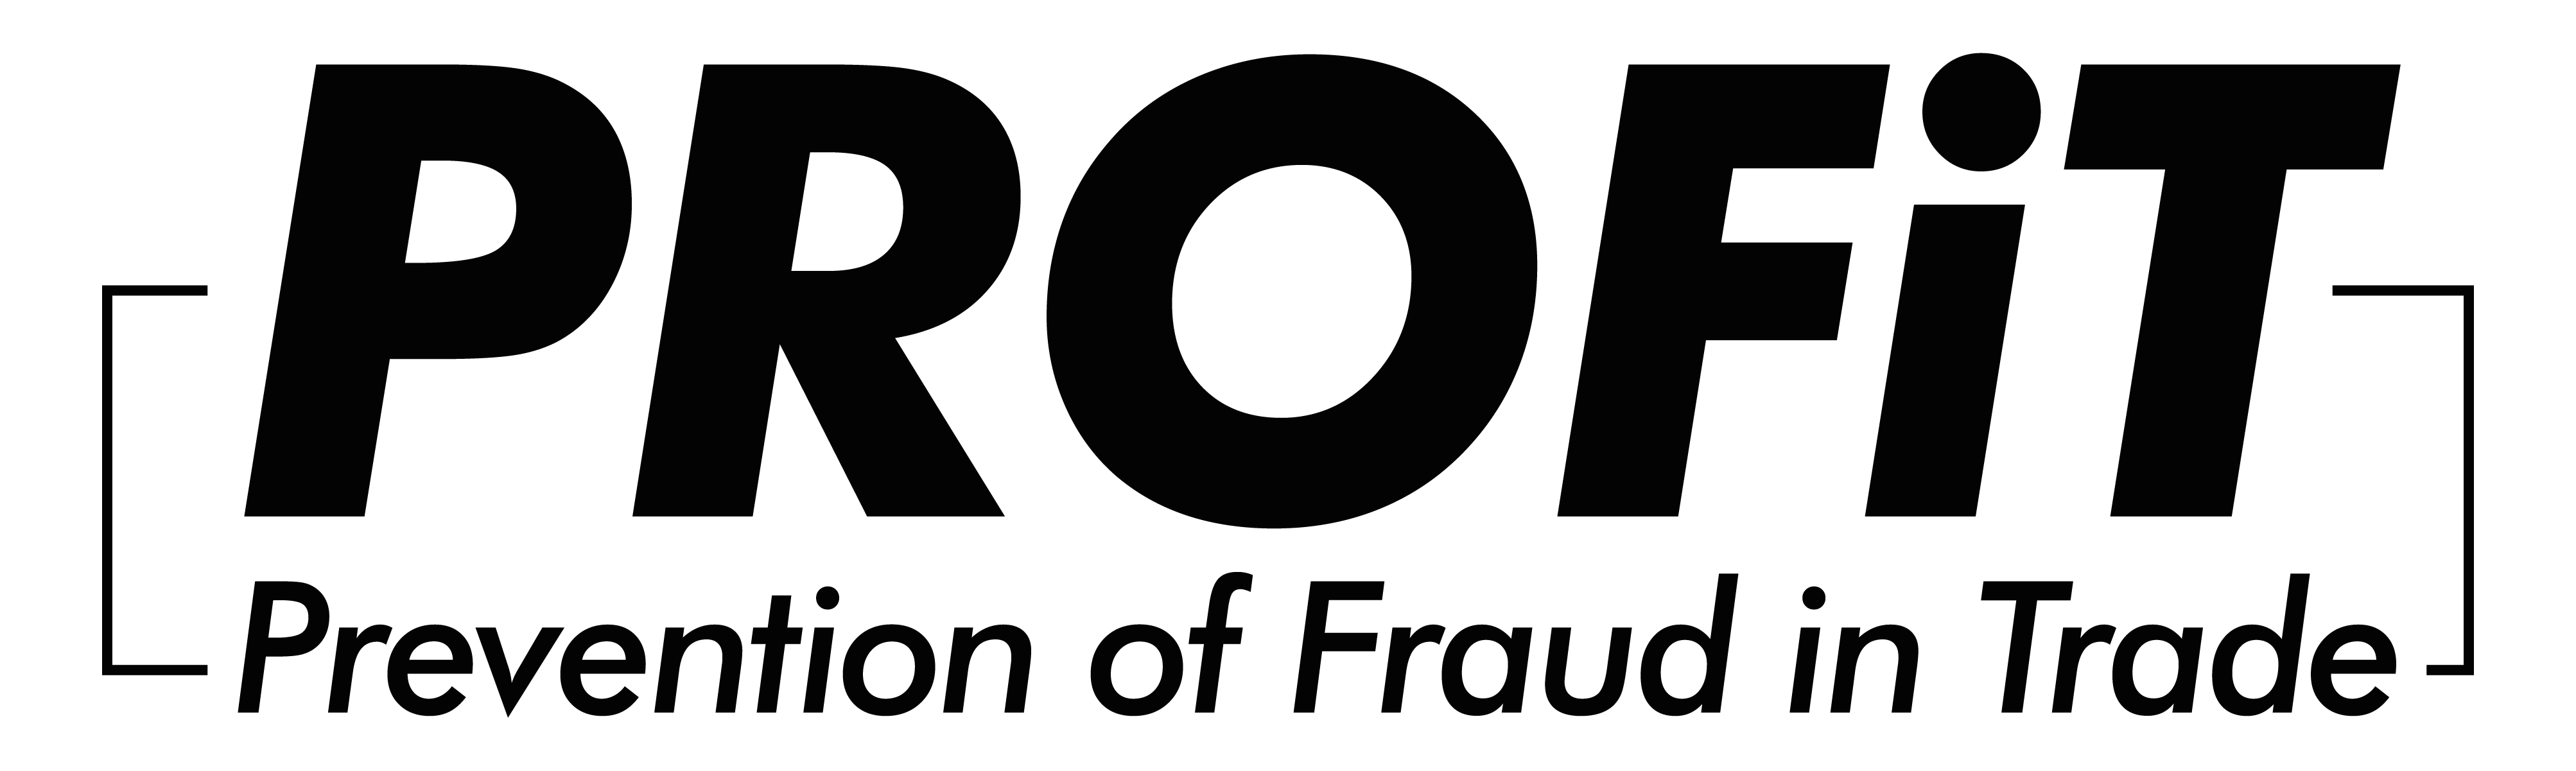 Prevention of Fraud in Trade